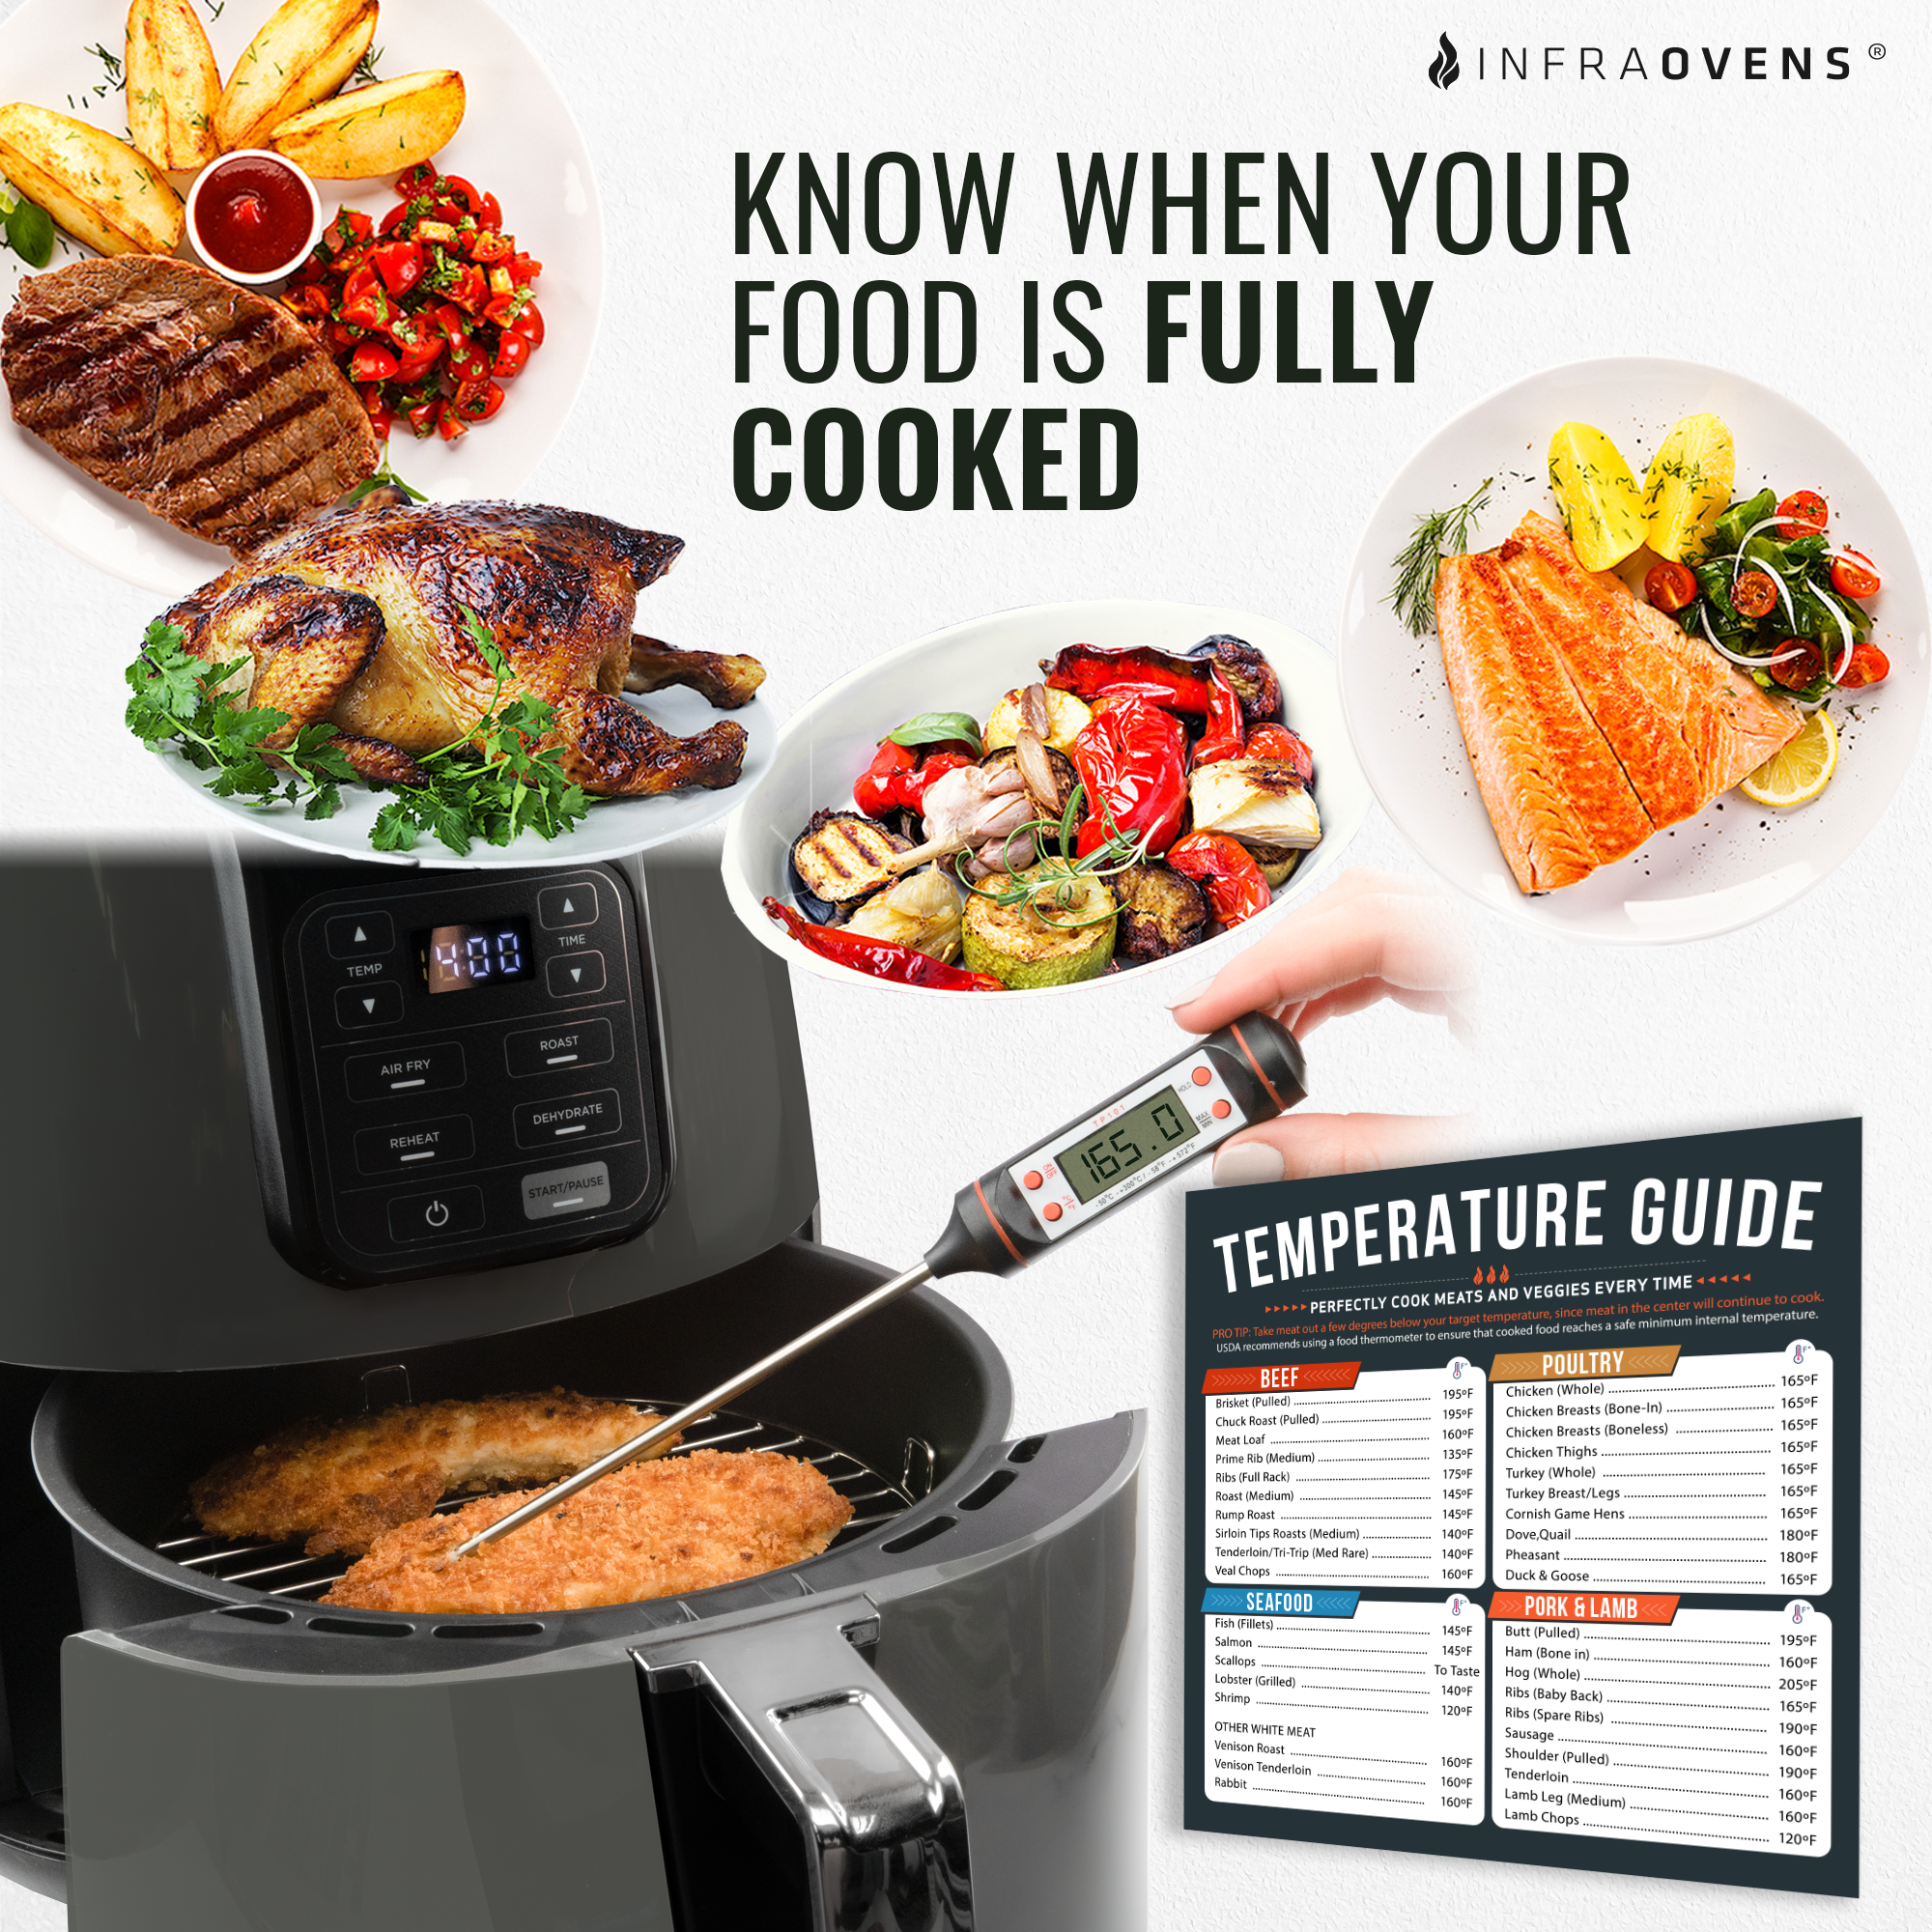 Air-Fryer Cooking Times for Your Favorite Foods